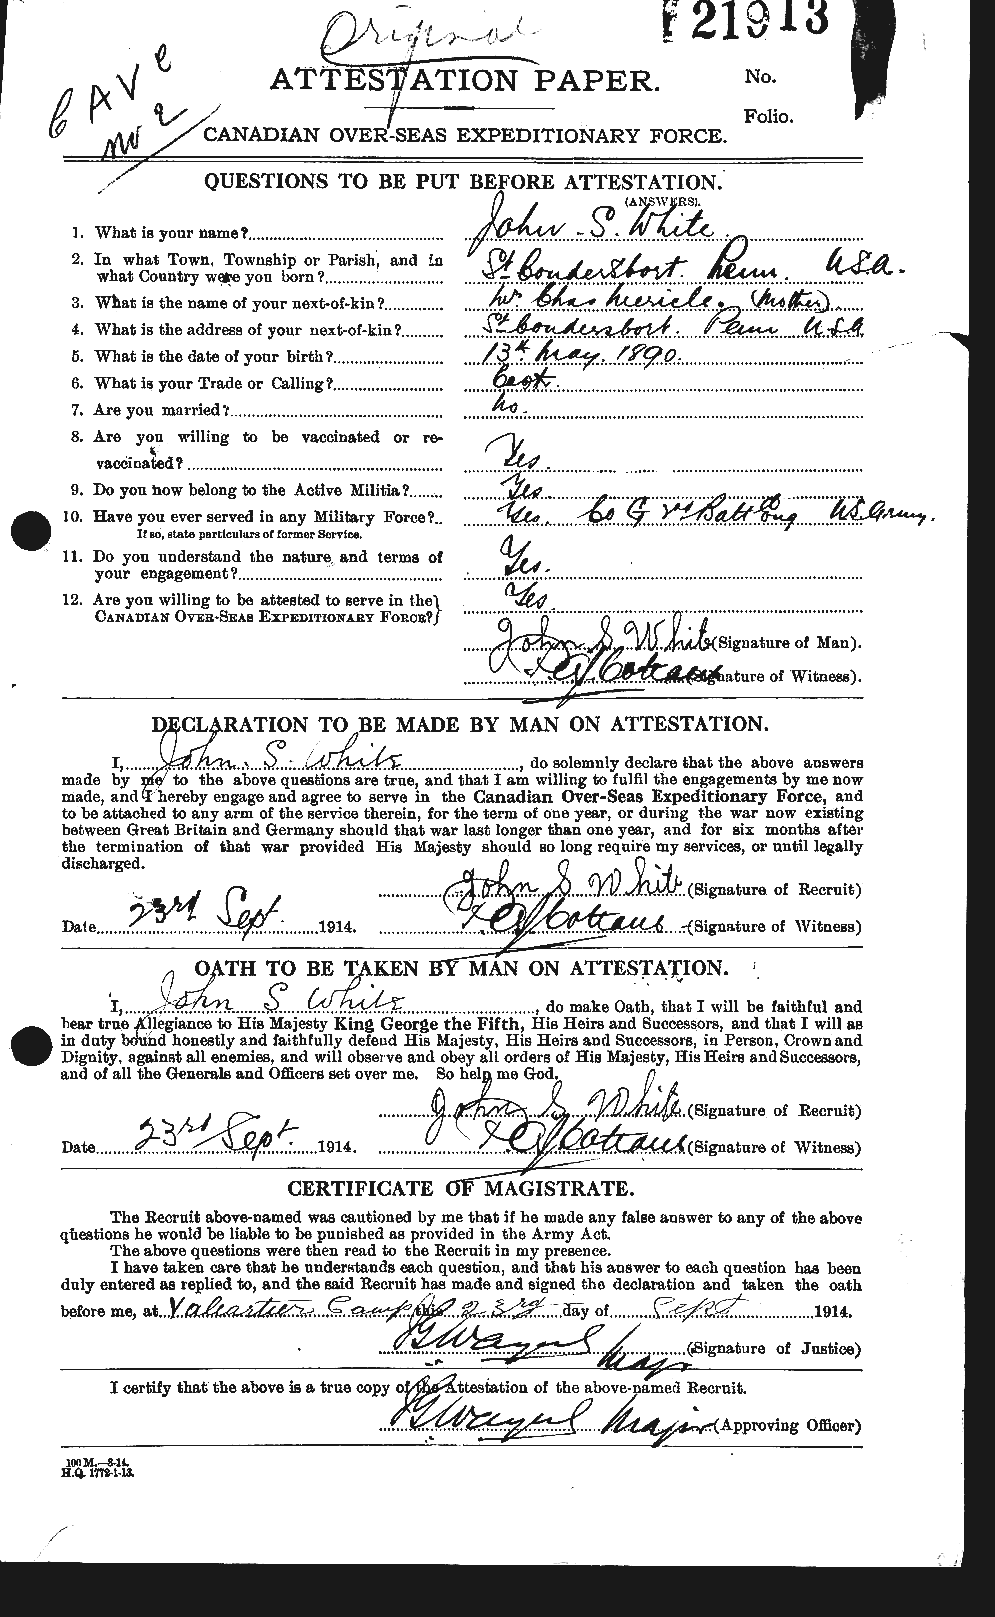 Personnel Records of the First World War - CEF 671600a